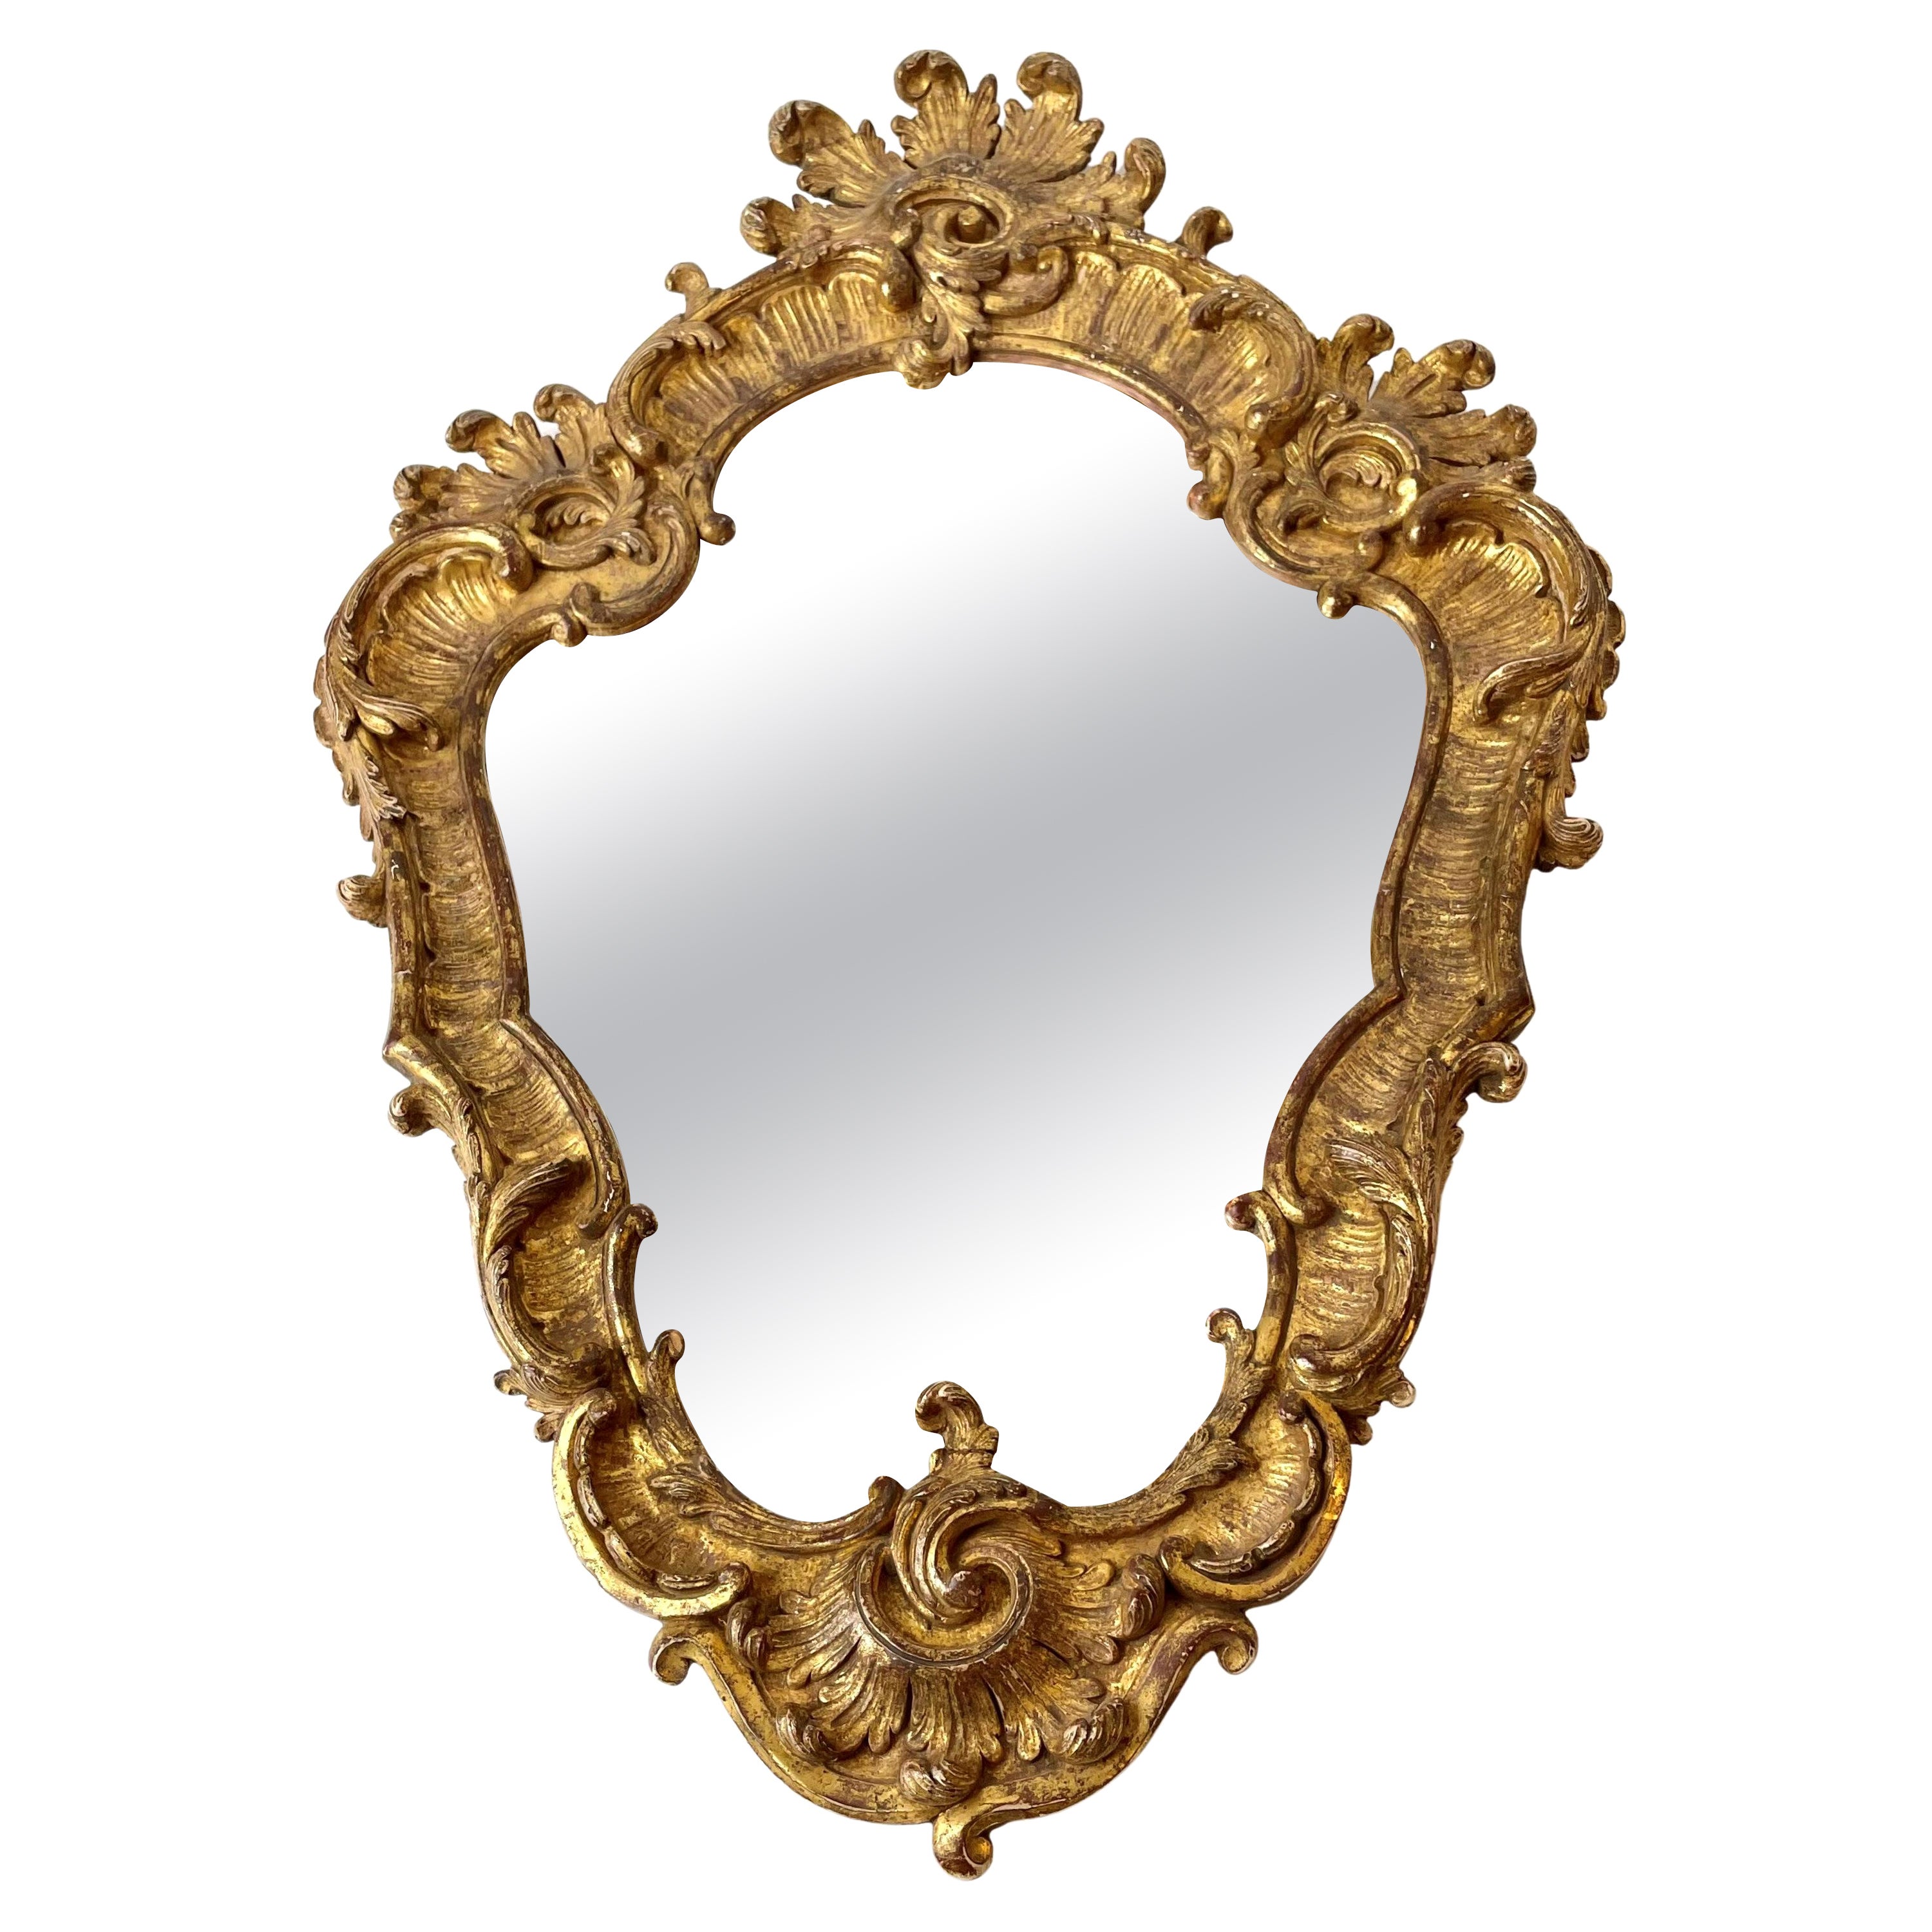 Elegant French Rococo Mirror with original gilding from Mid-18th Century